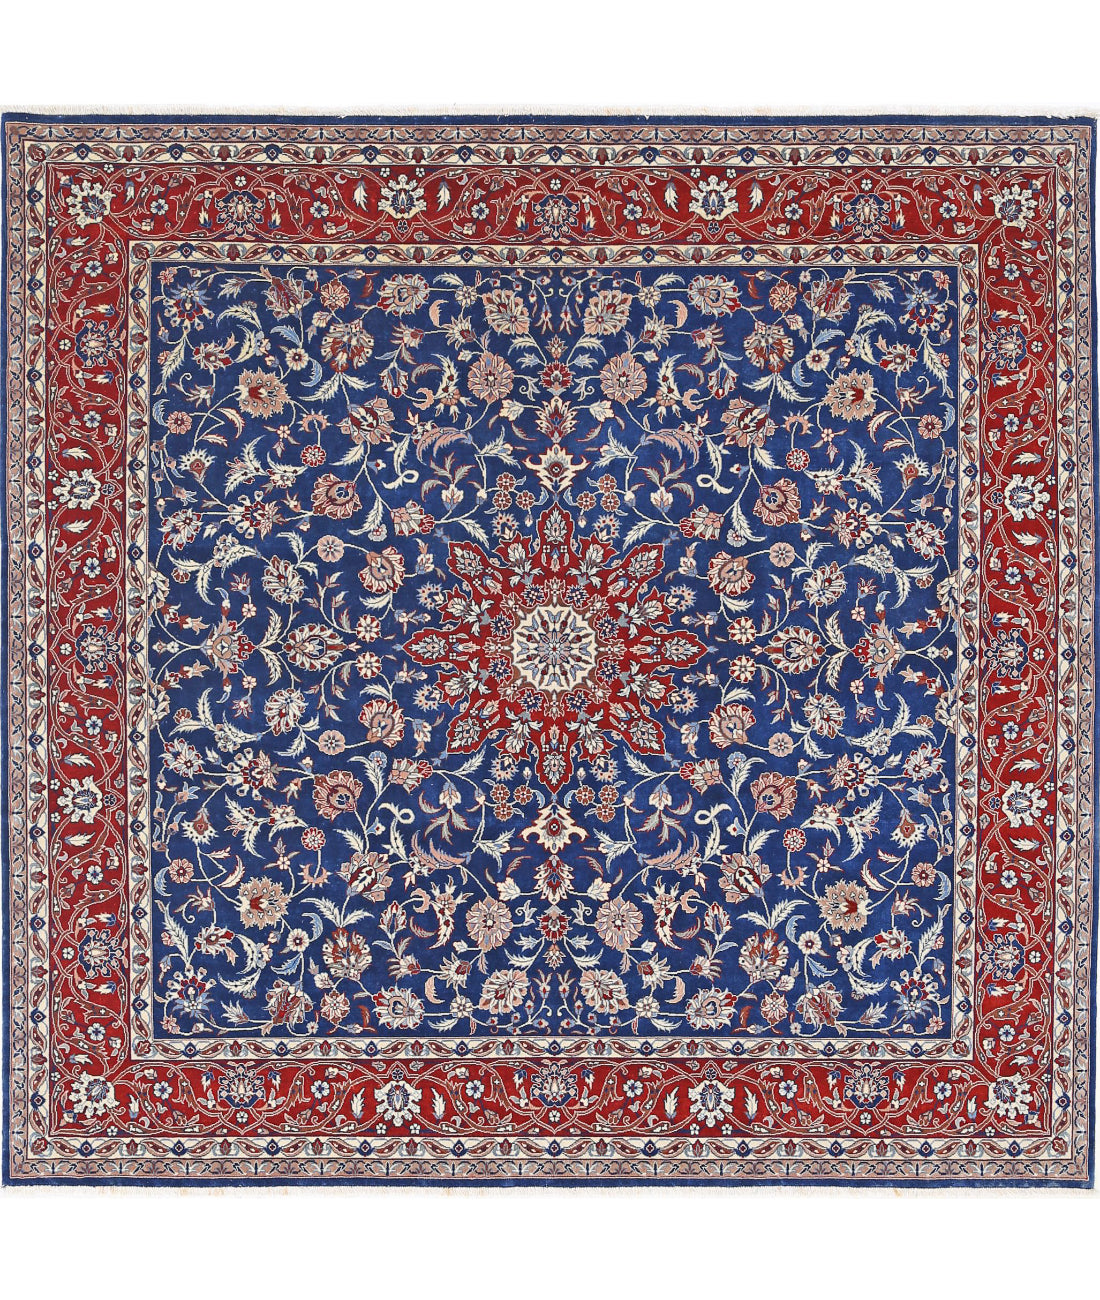 Heritage 6'6'' X 6'8'' Hand-Knotted Wool Rug 6'6'' x 6'8'' (195 X 200) / Blue / Red